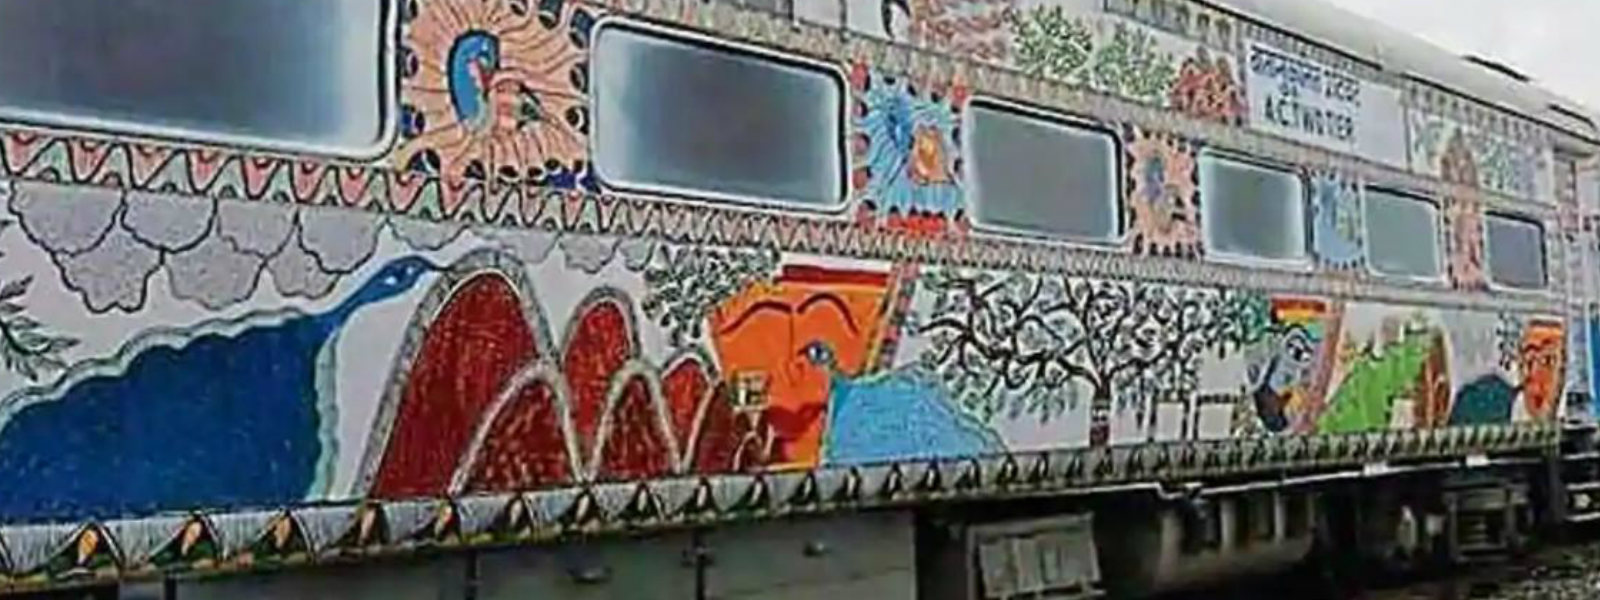 Northern India train gets a makeover 